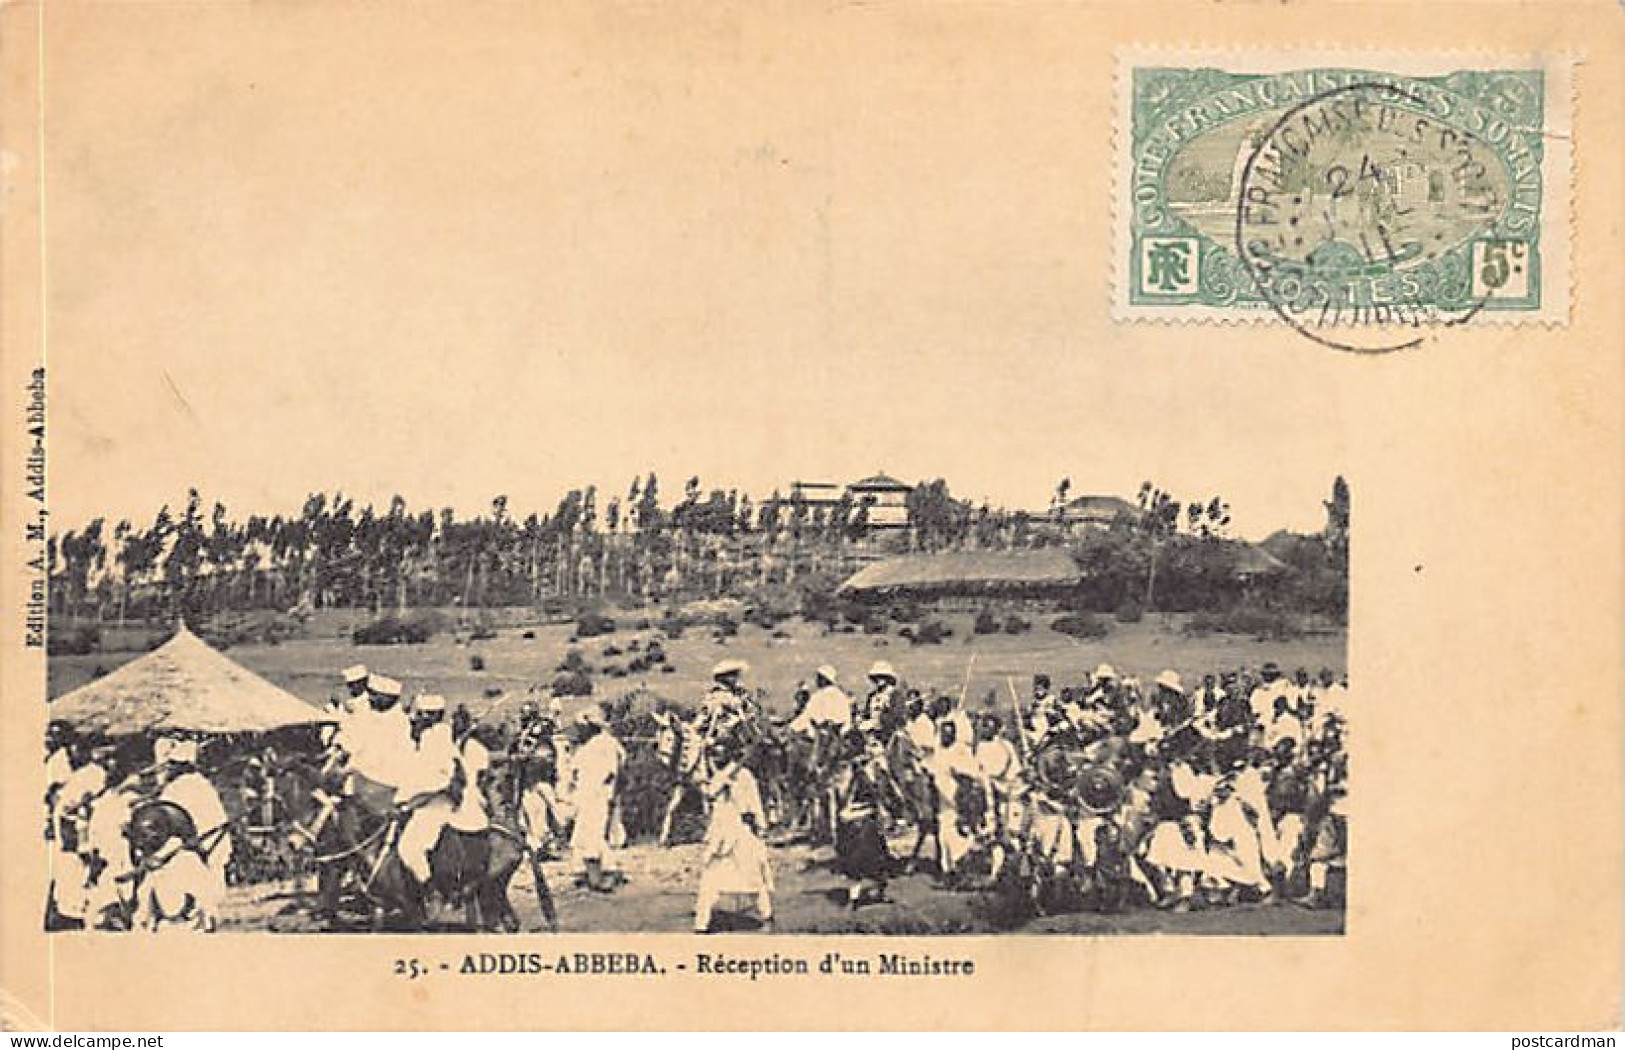 Ethiopia - ADDIS ABABA - Arrival Of A Foreign Ambassador - Publ. A. M. 25 - Ethiopie